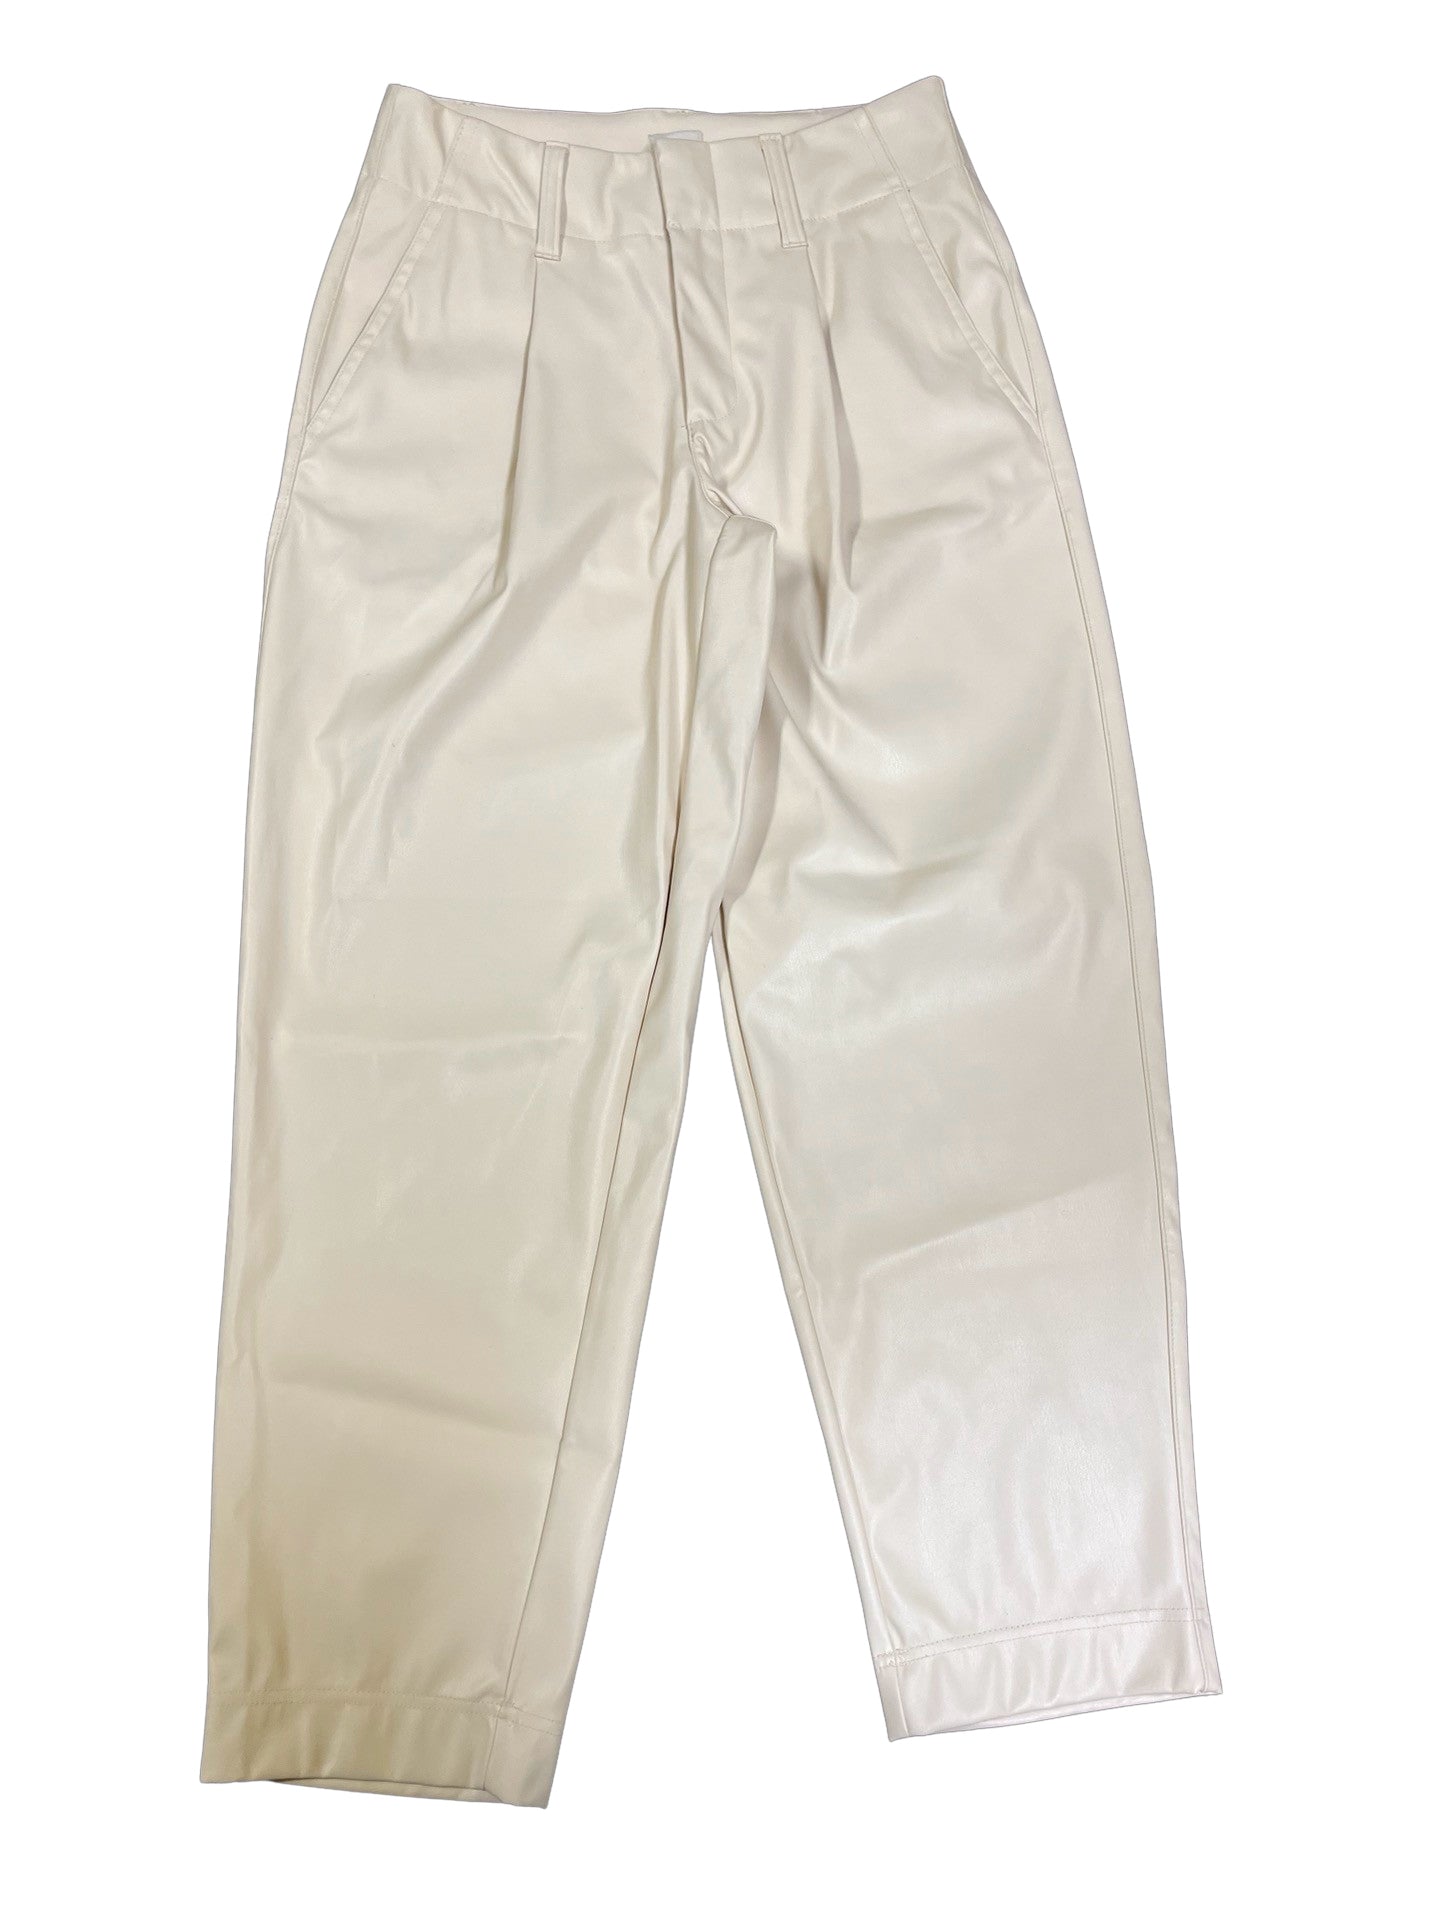 Size 2 A New Day Pants